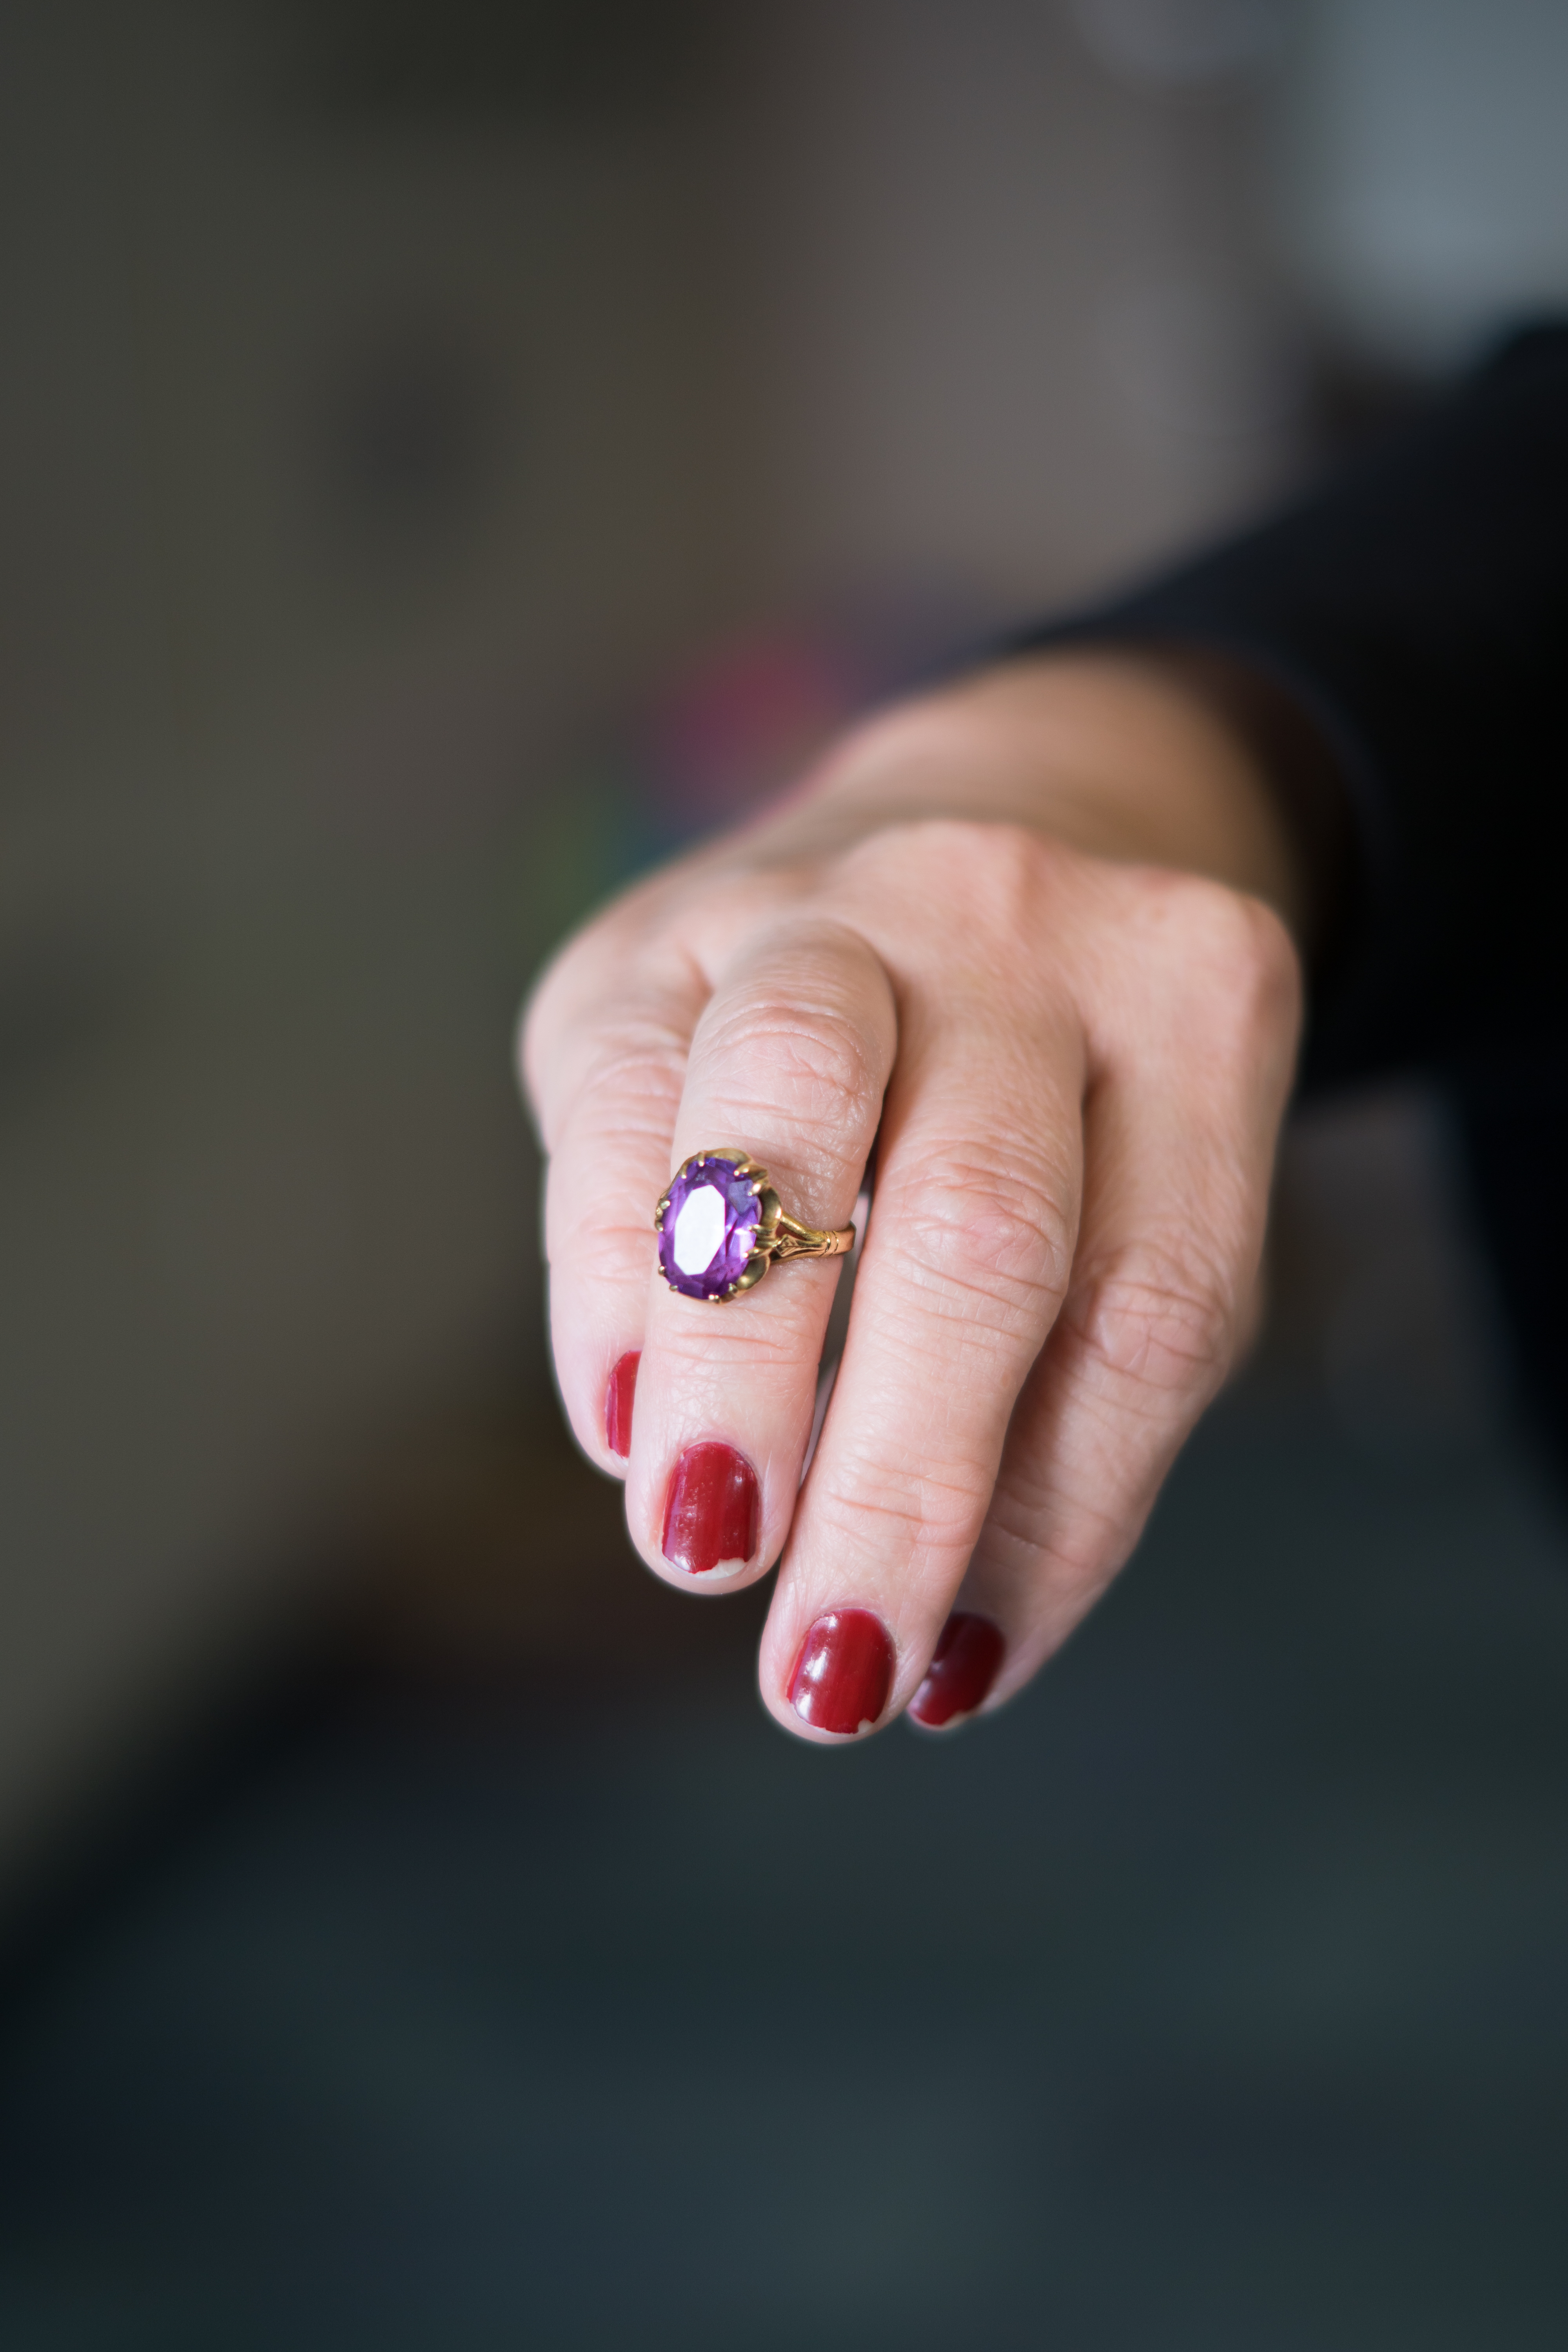 Hand holding a ring with a purple gemstone.